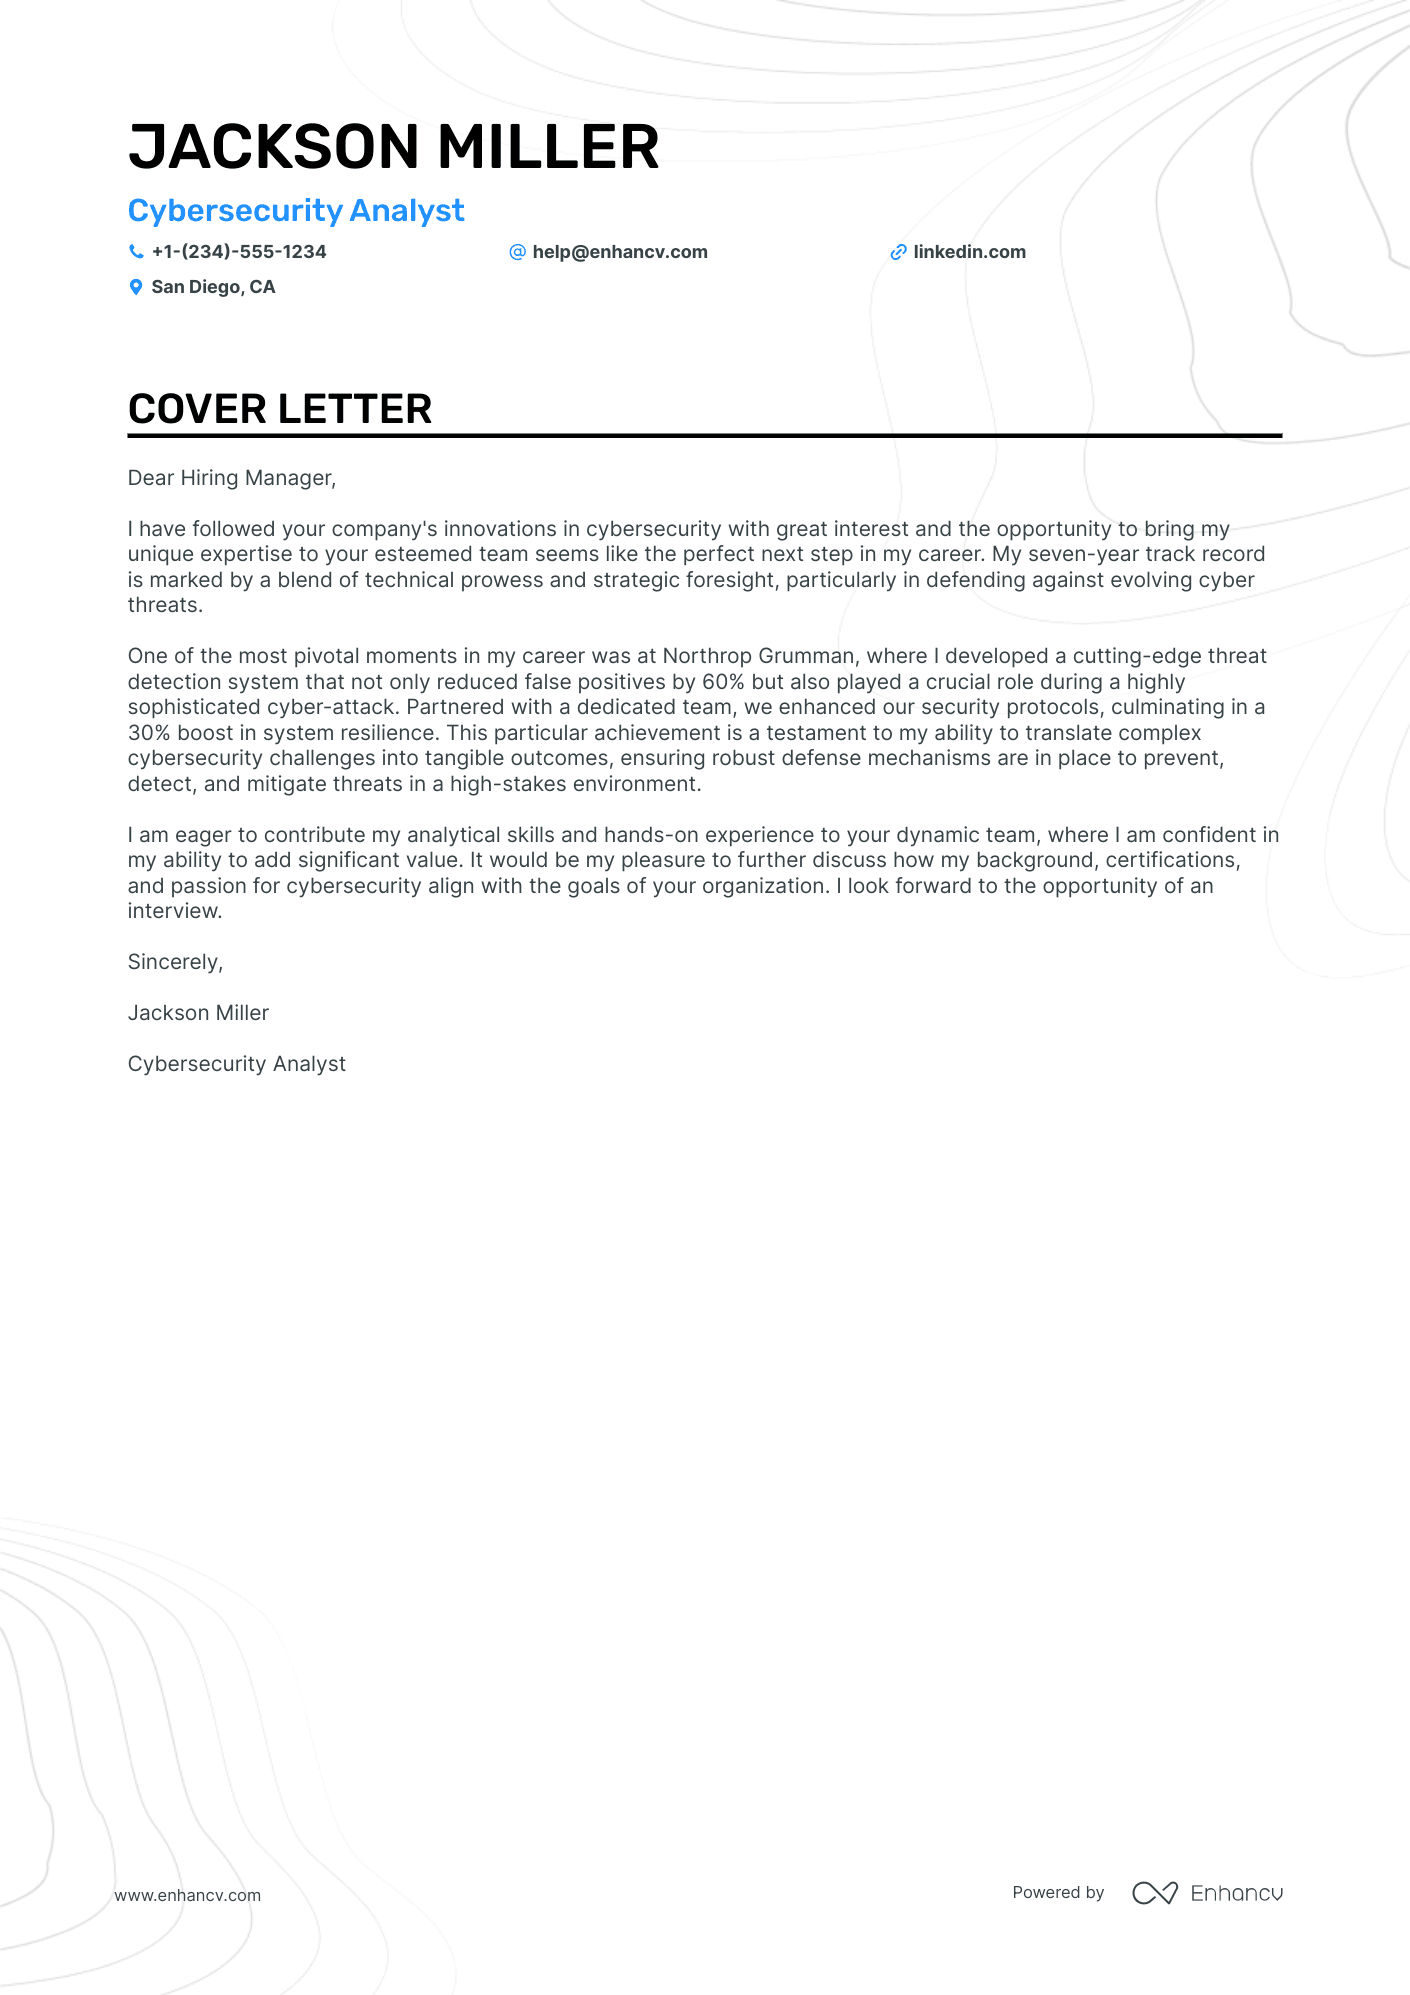 Cyber Security Analyst cover letter